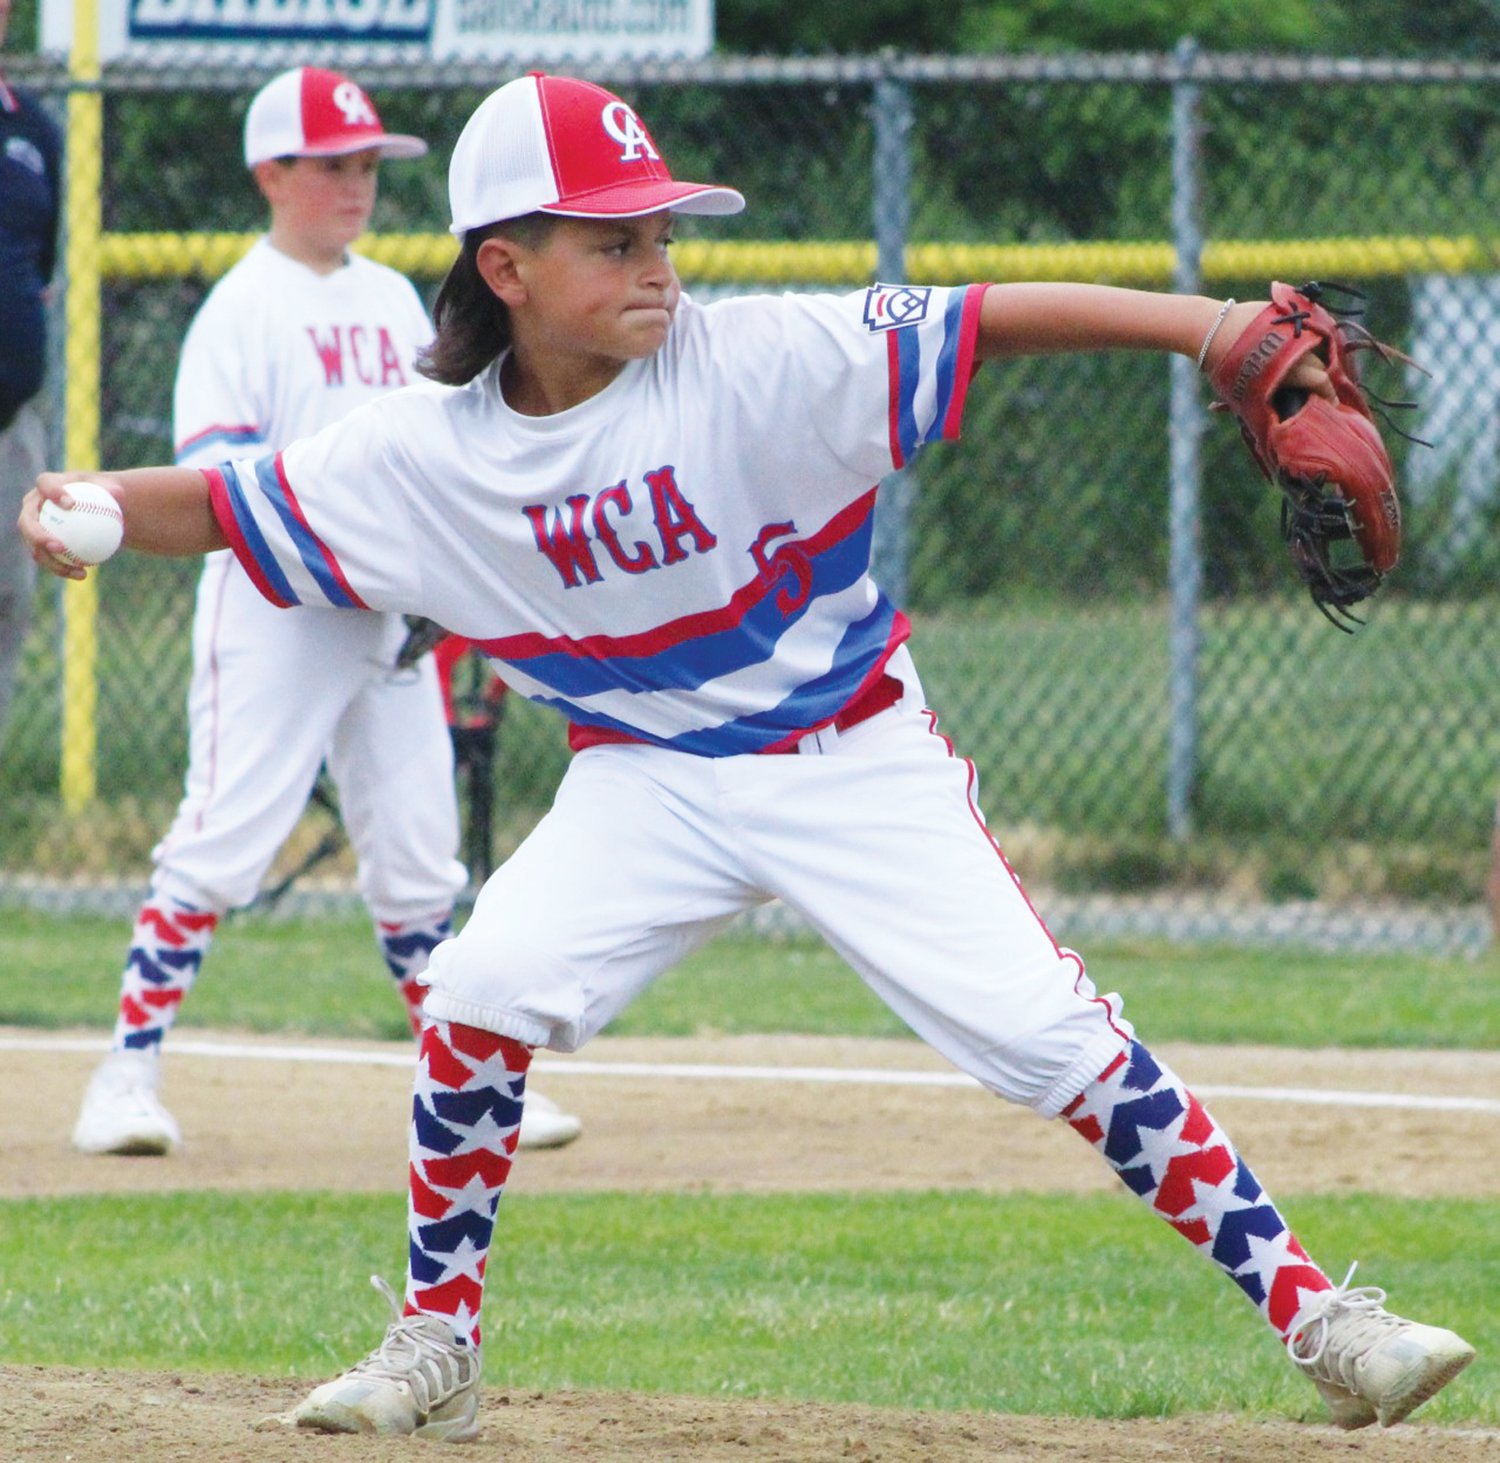 NO-HITTER: WCA’s Enzo Gianfrancesco, who pitched a no-hitter on Tuesday. (Photos by Ryan D. Murray)